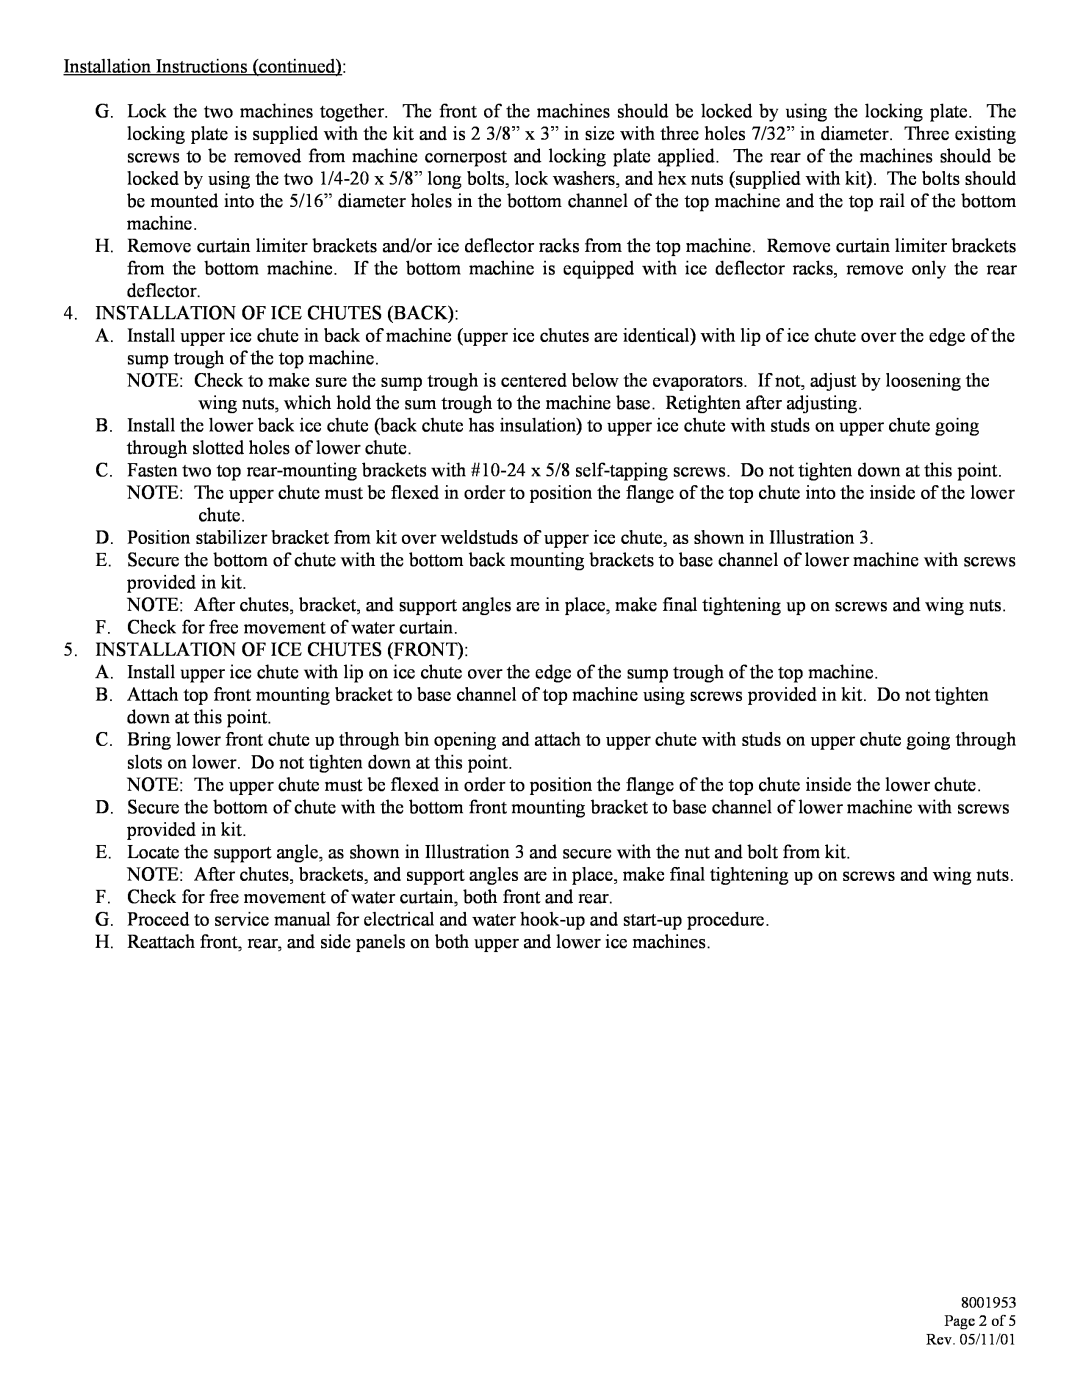 Manitowoc Ice E-1100 installation instructions Installation Instructions continued 